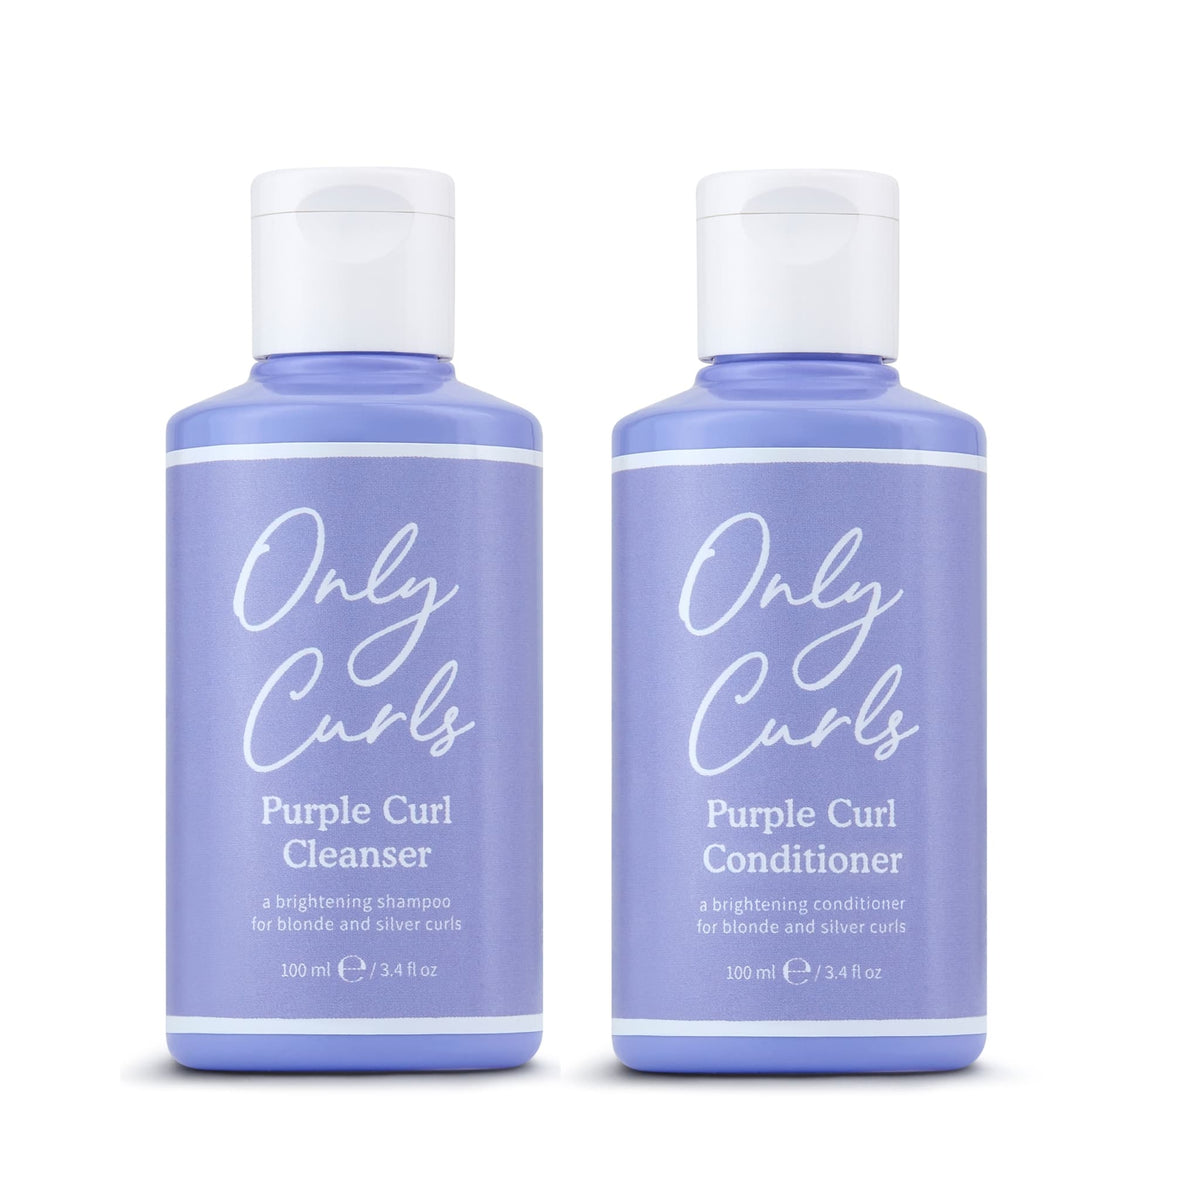 Only Curls Purple Curl Cleansing Bundle - Only Curls